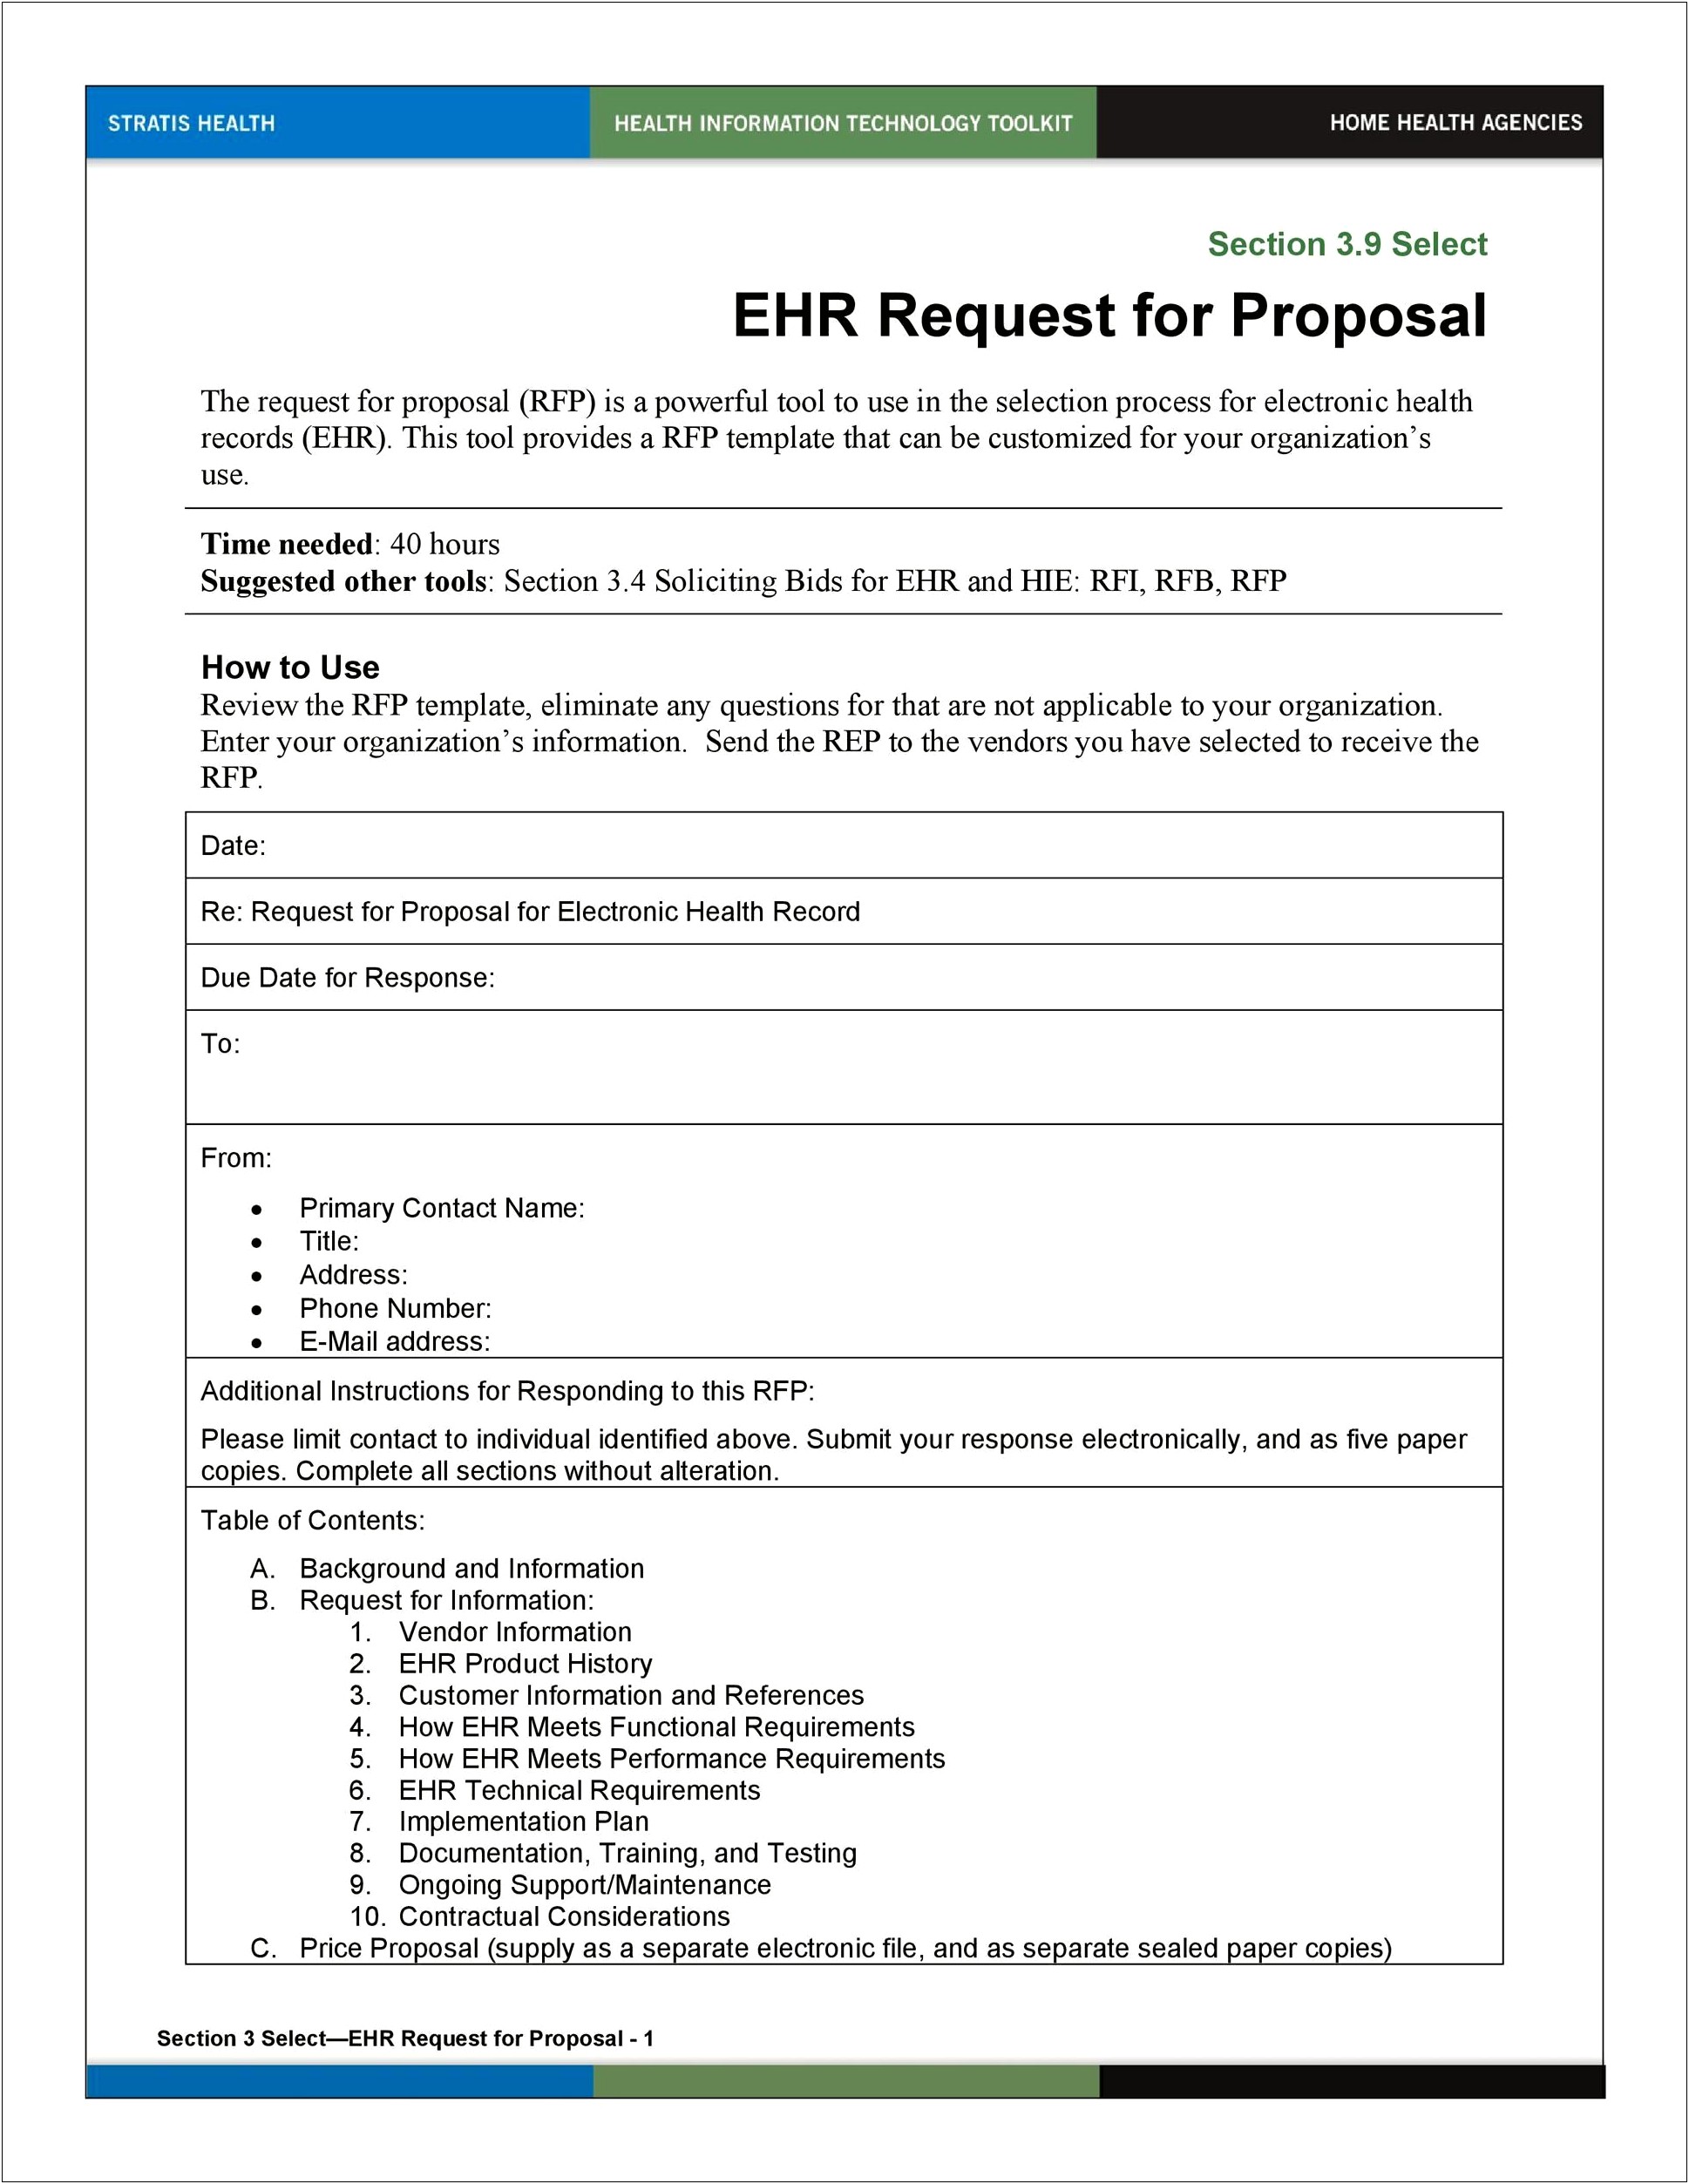 Free Request For Proposal Template Word